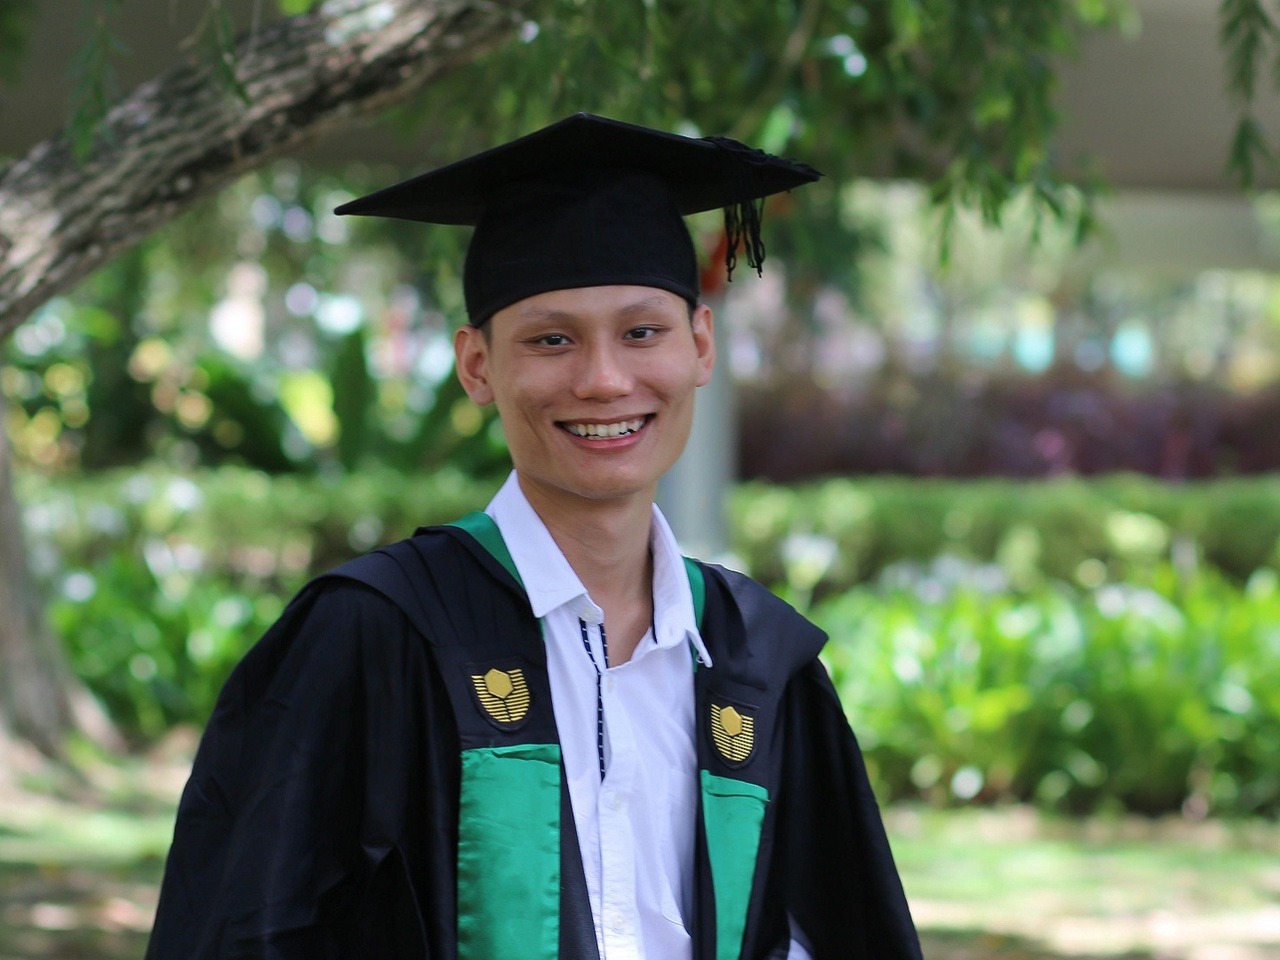 “Studying at Curtin Malaysia allowed me to experience an Australian education in here Malaysia. The experience was very different from the typical learning environment in Malaysia. More than half of my coursework was practical, with a very up-to-date...